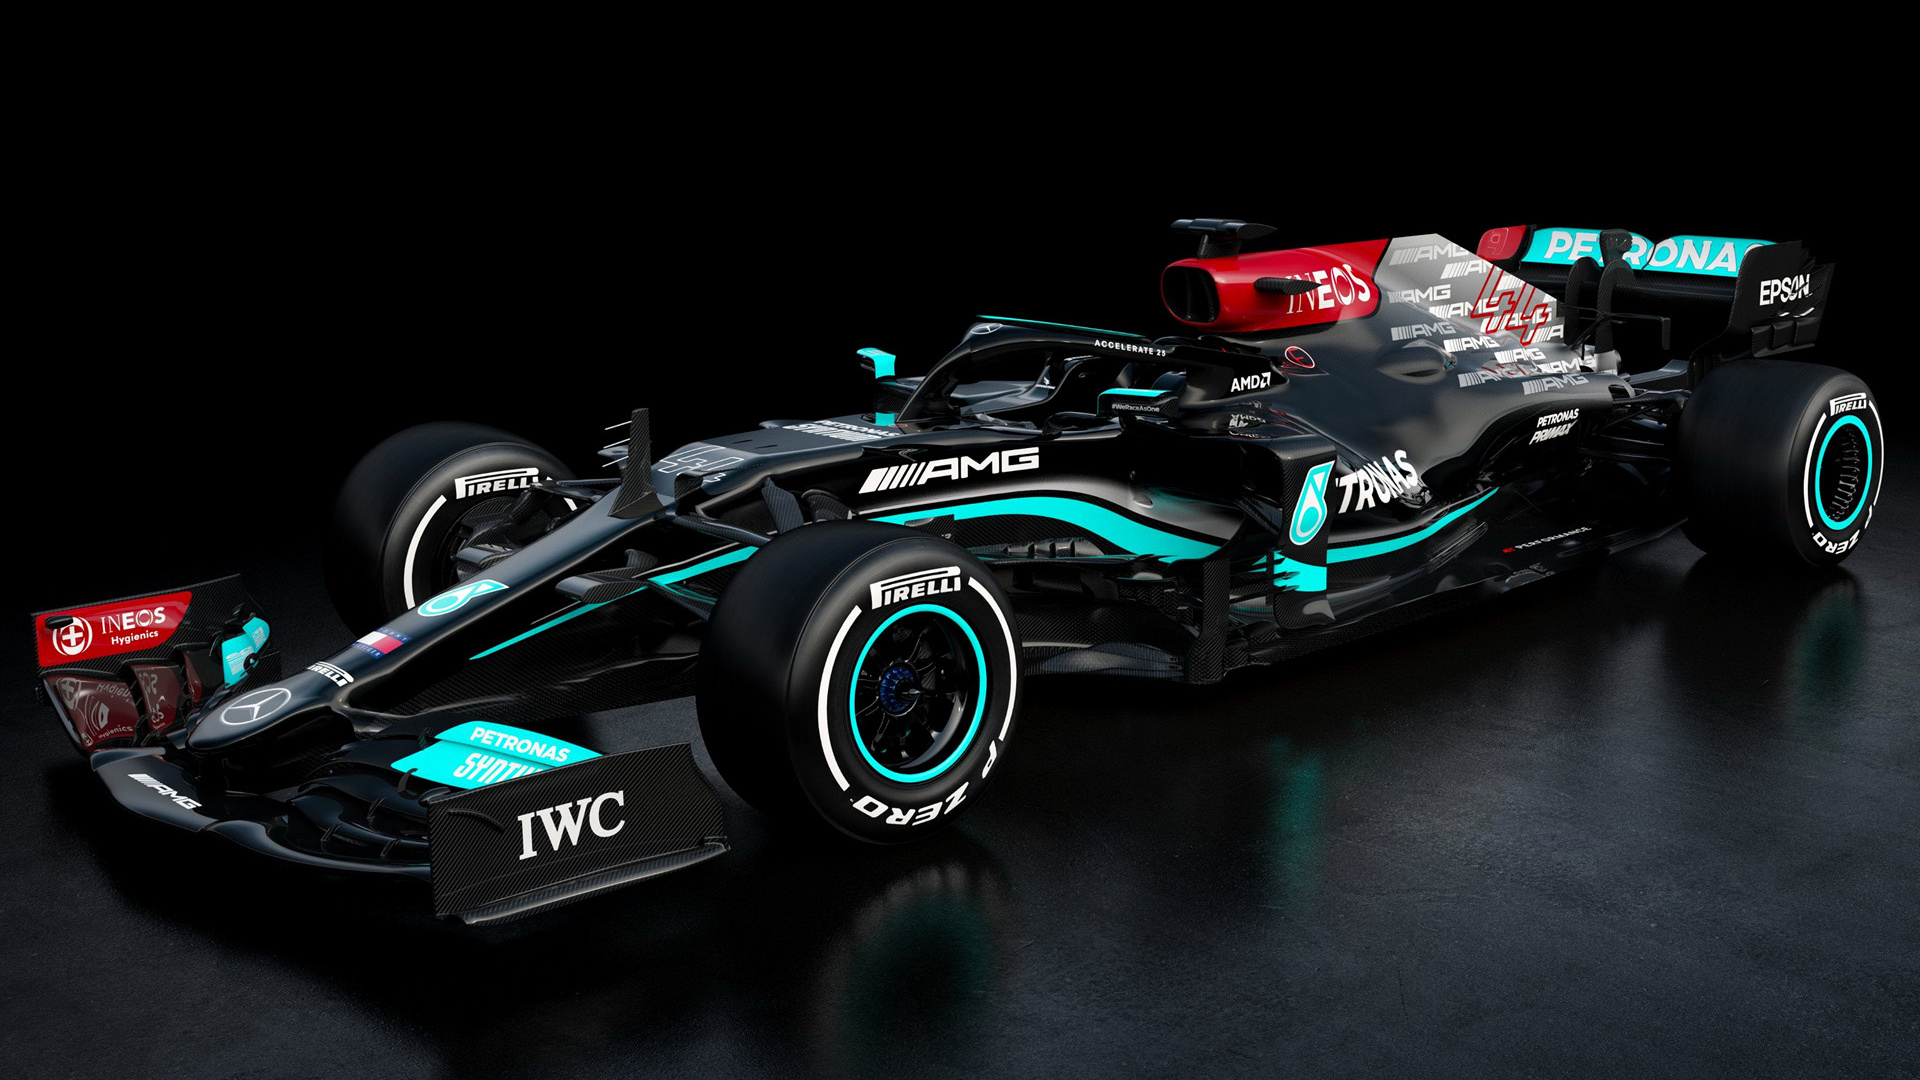 2021 Mercedes AMG F1 W12 E Performance Wallpapers and HD Images Car 